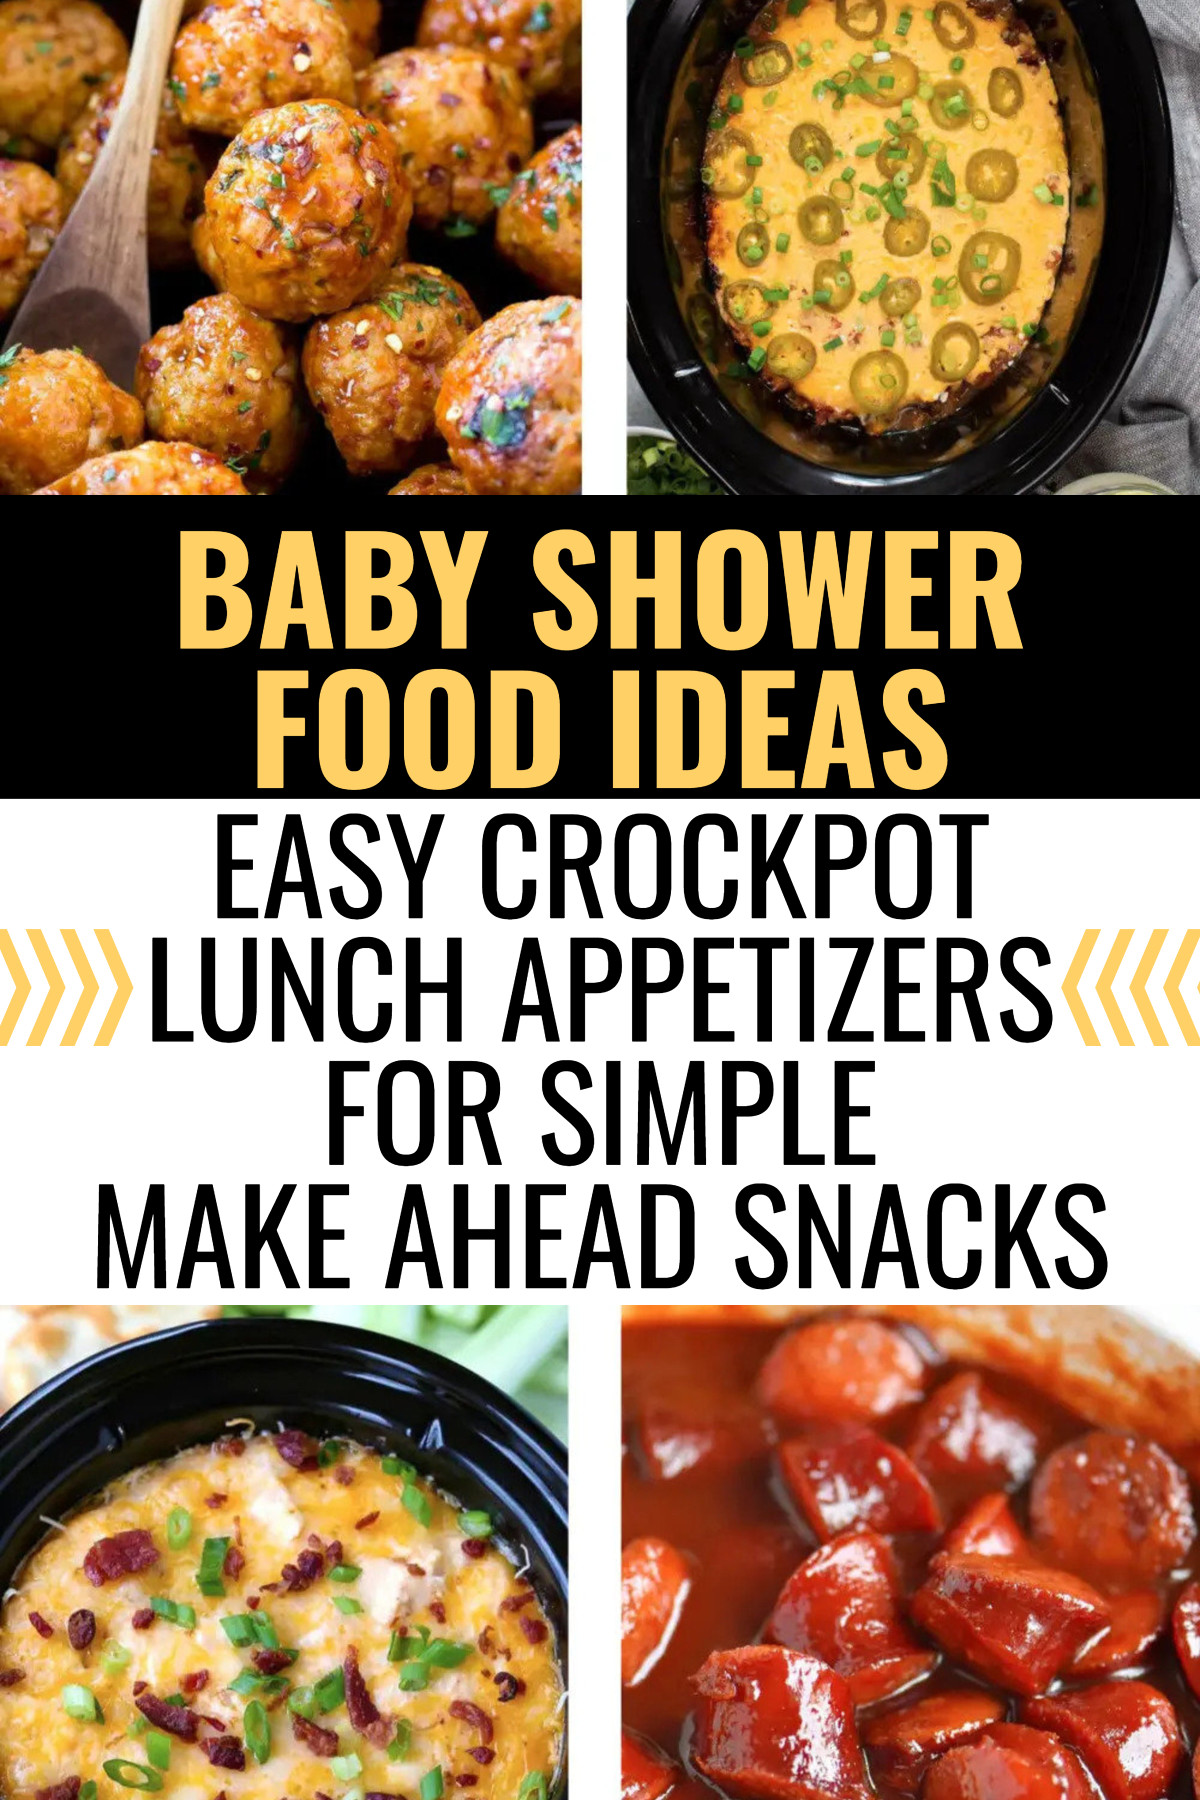 Baby shower food ideas easy crockpot appetizers for simple make ahead snacks